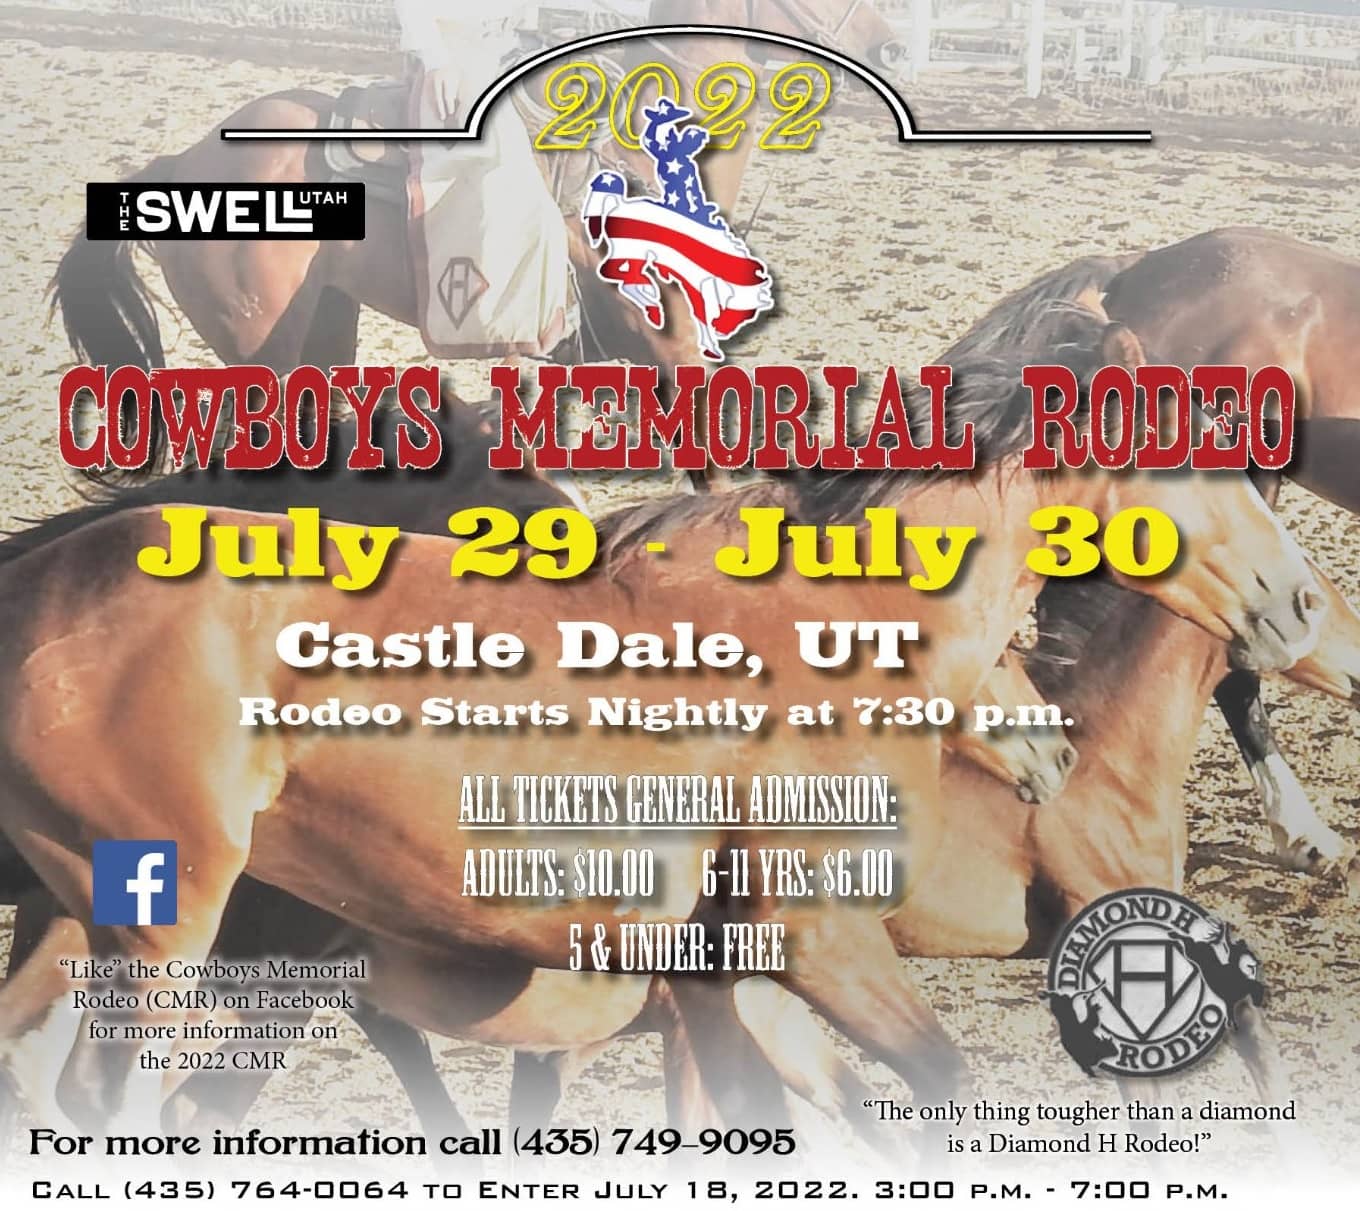 Cowboys Memorial Rodeo on July 29 & July 30